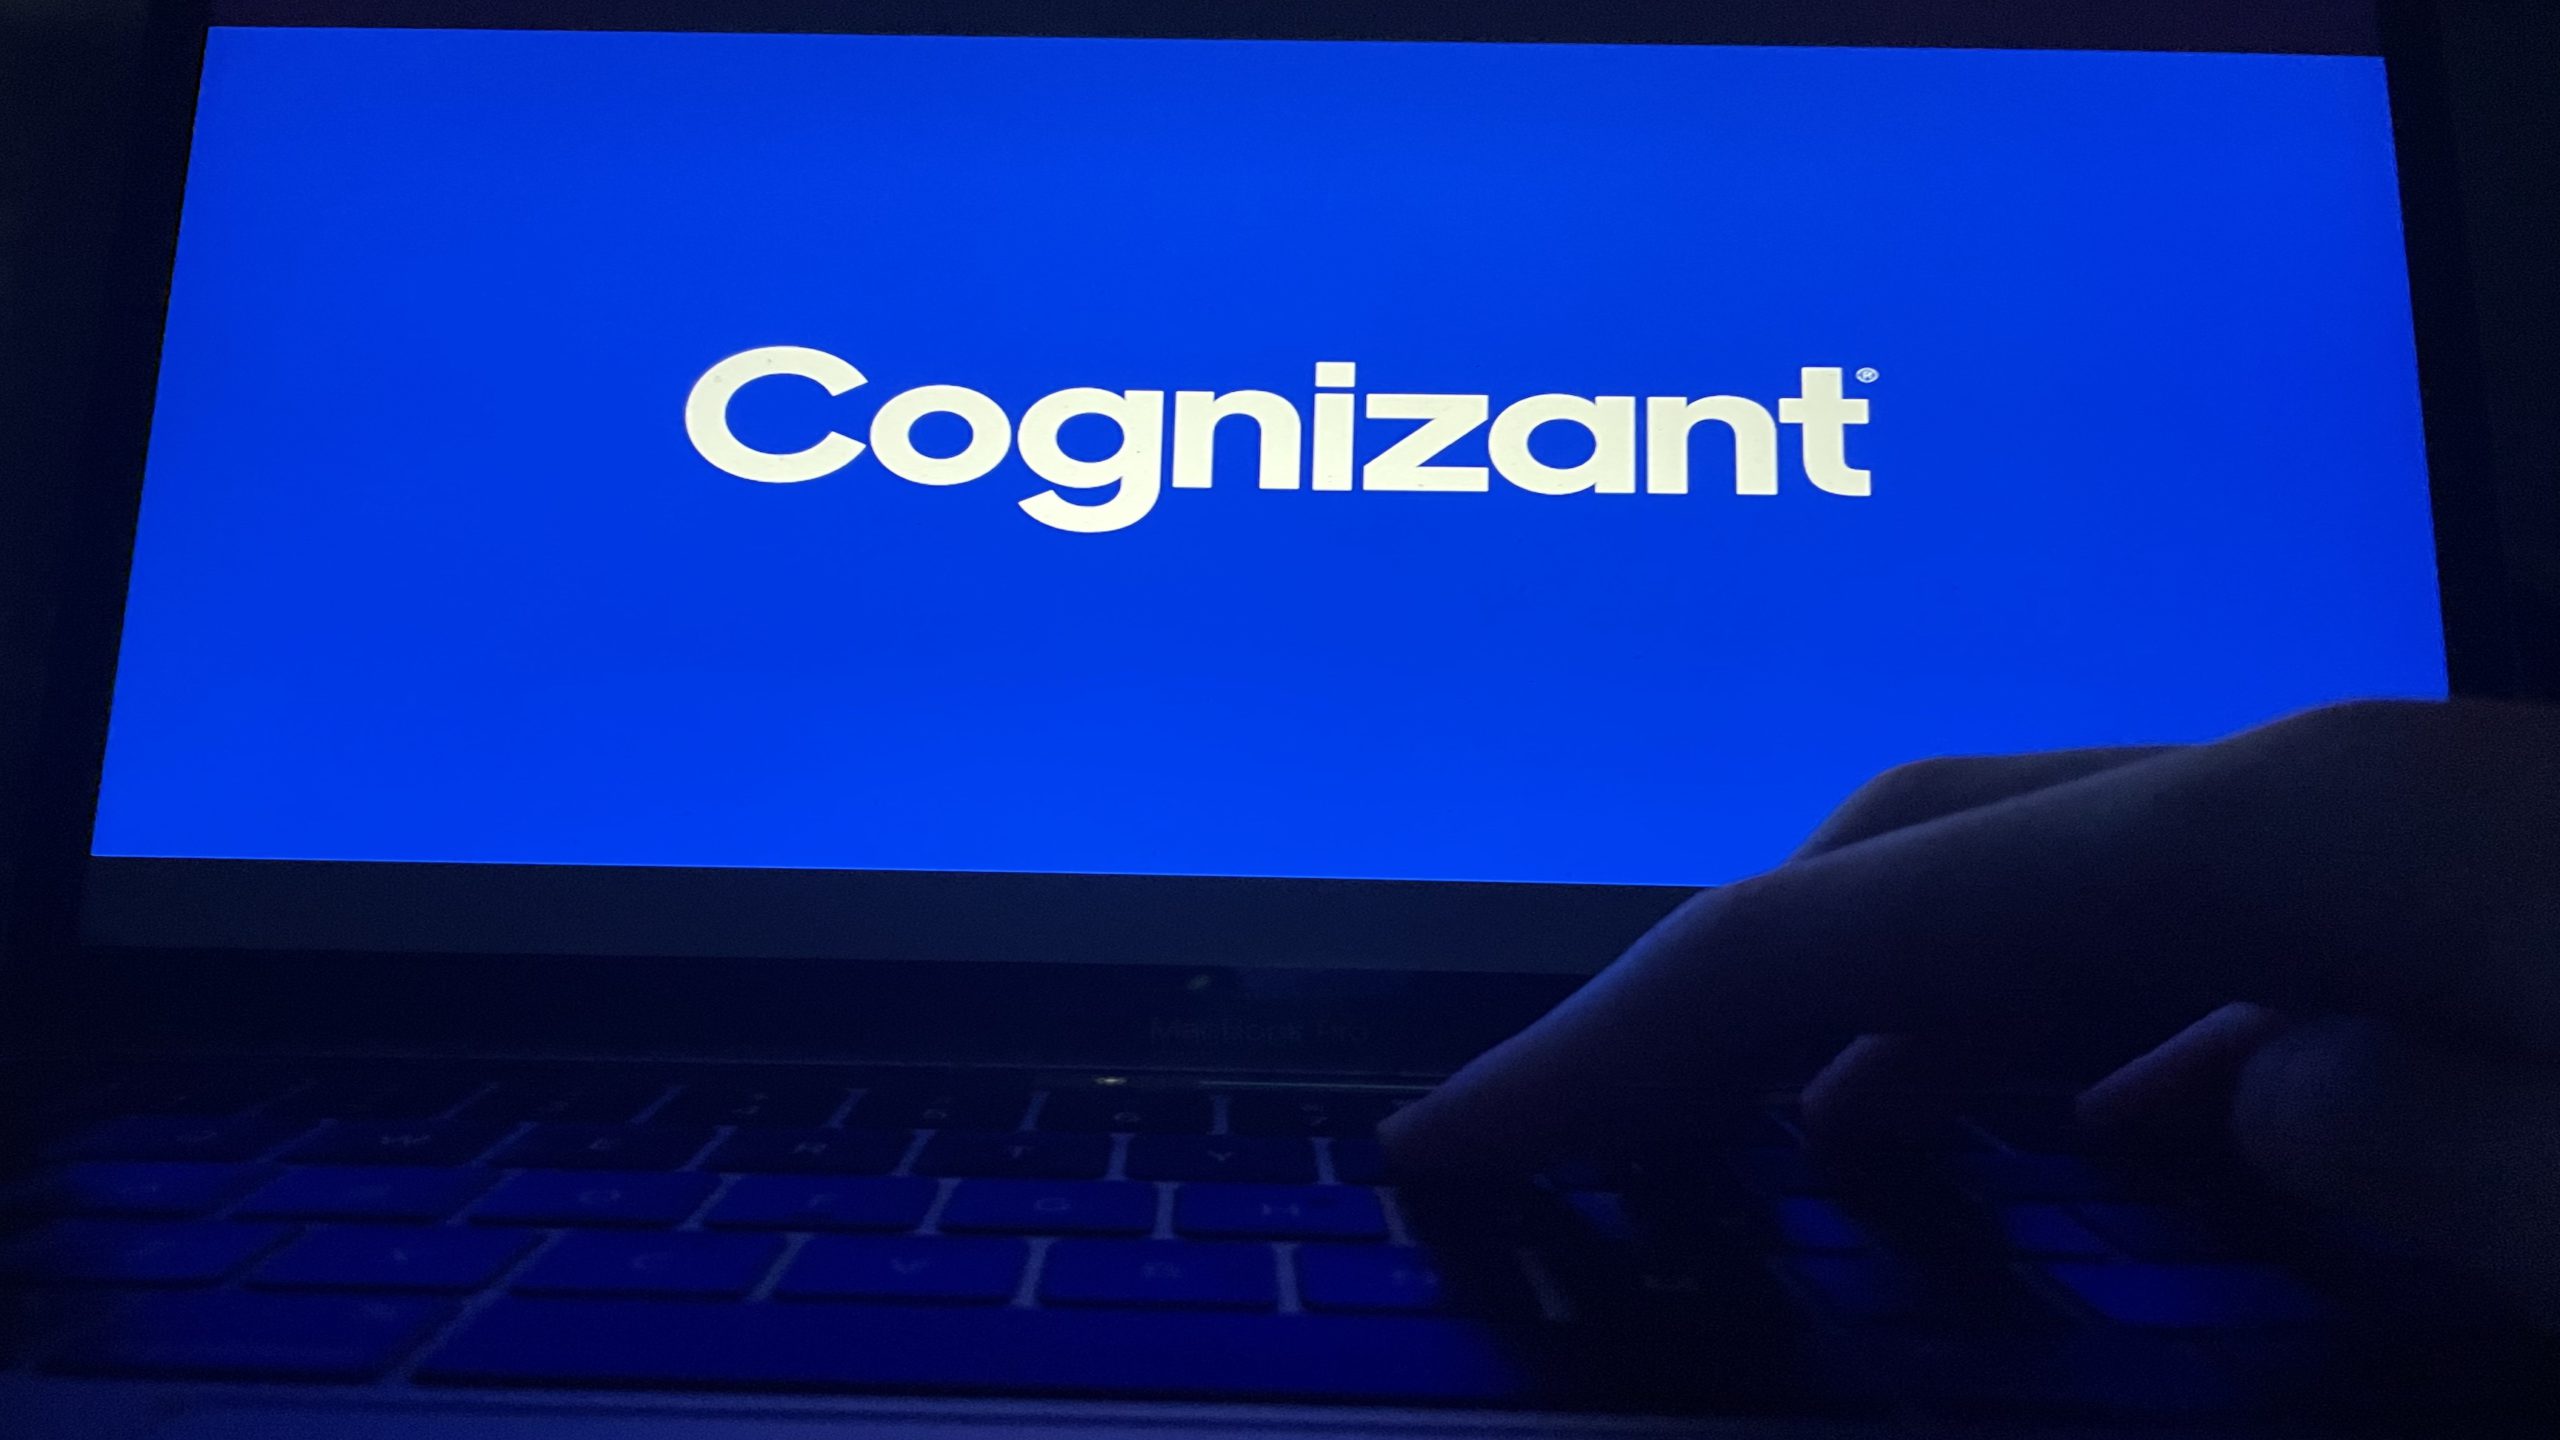 The province is entering an agreement with massive tech company Cognizant, hoping to bring jobs and economic growth.